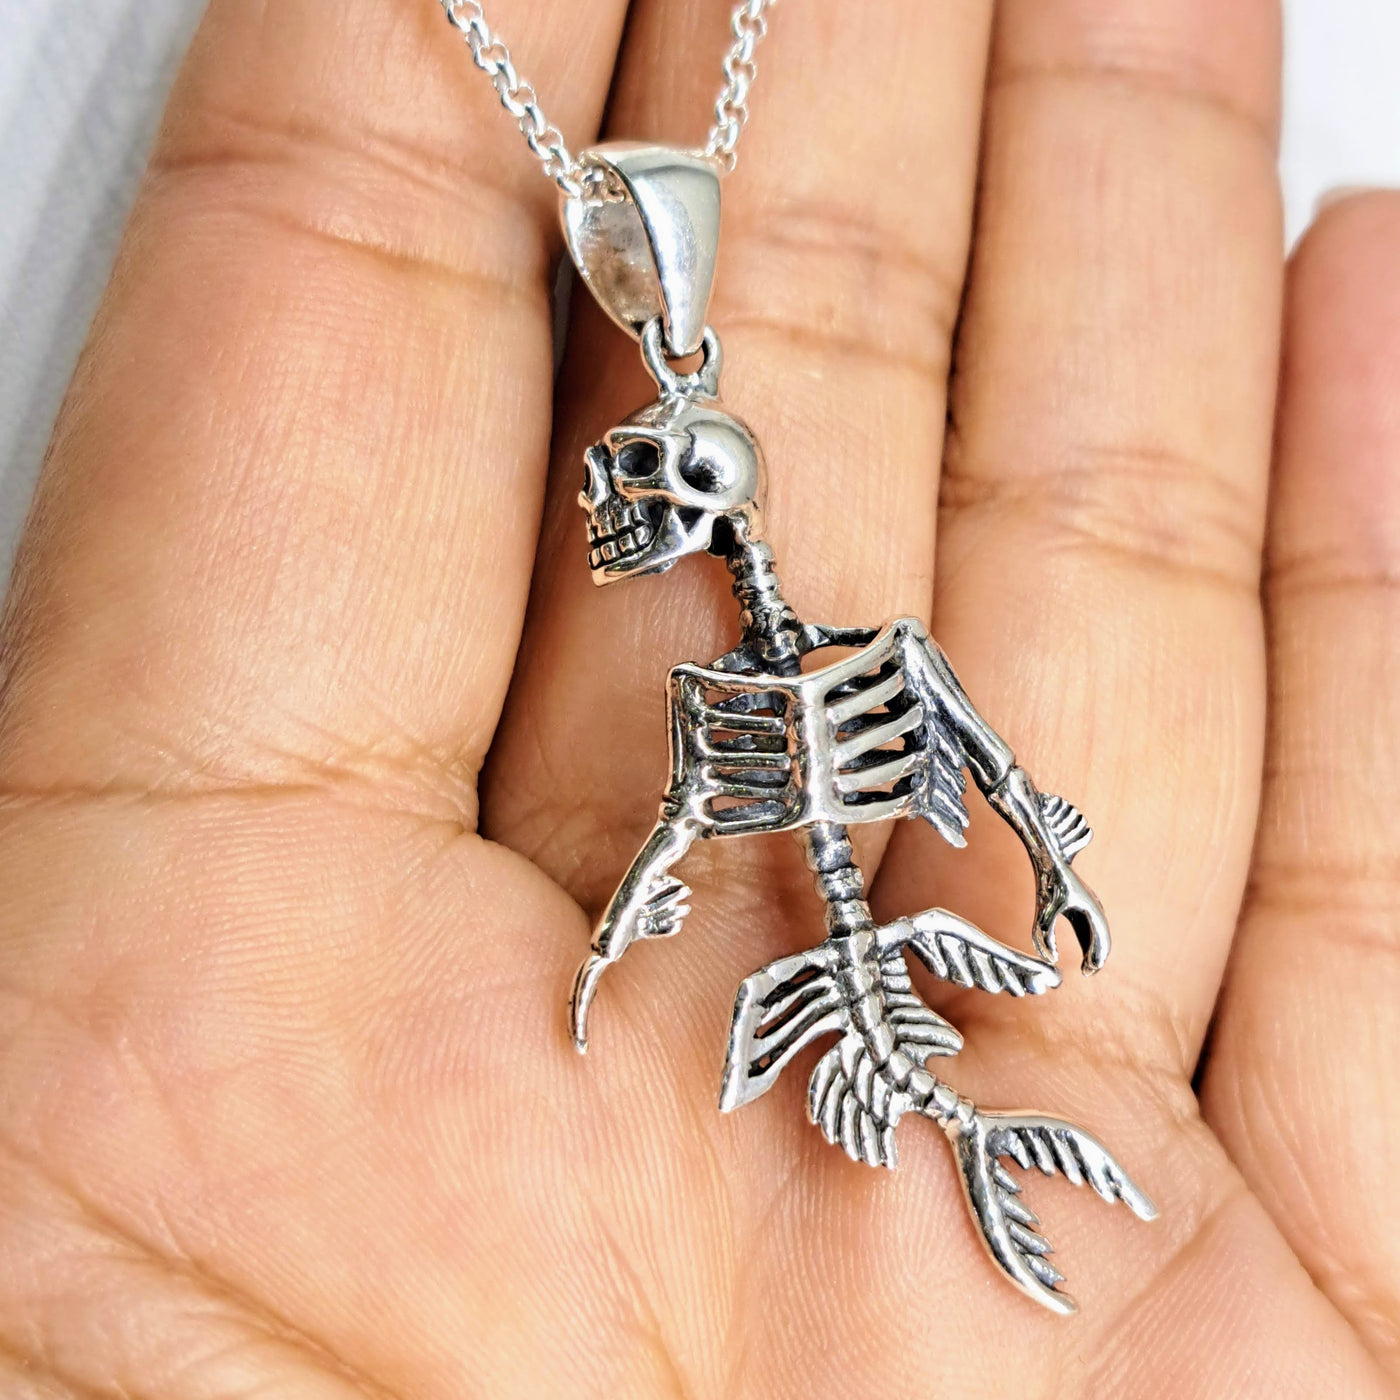 "Tell No Tails!" 26" Pendant Necklace - Sterling Mermaid's Skeleton